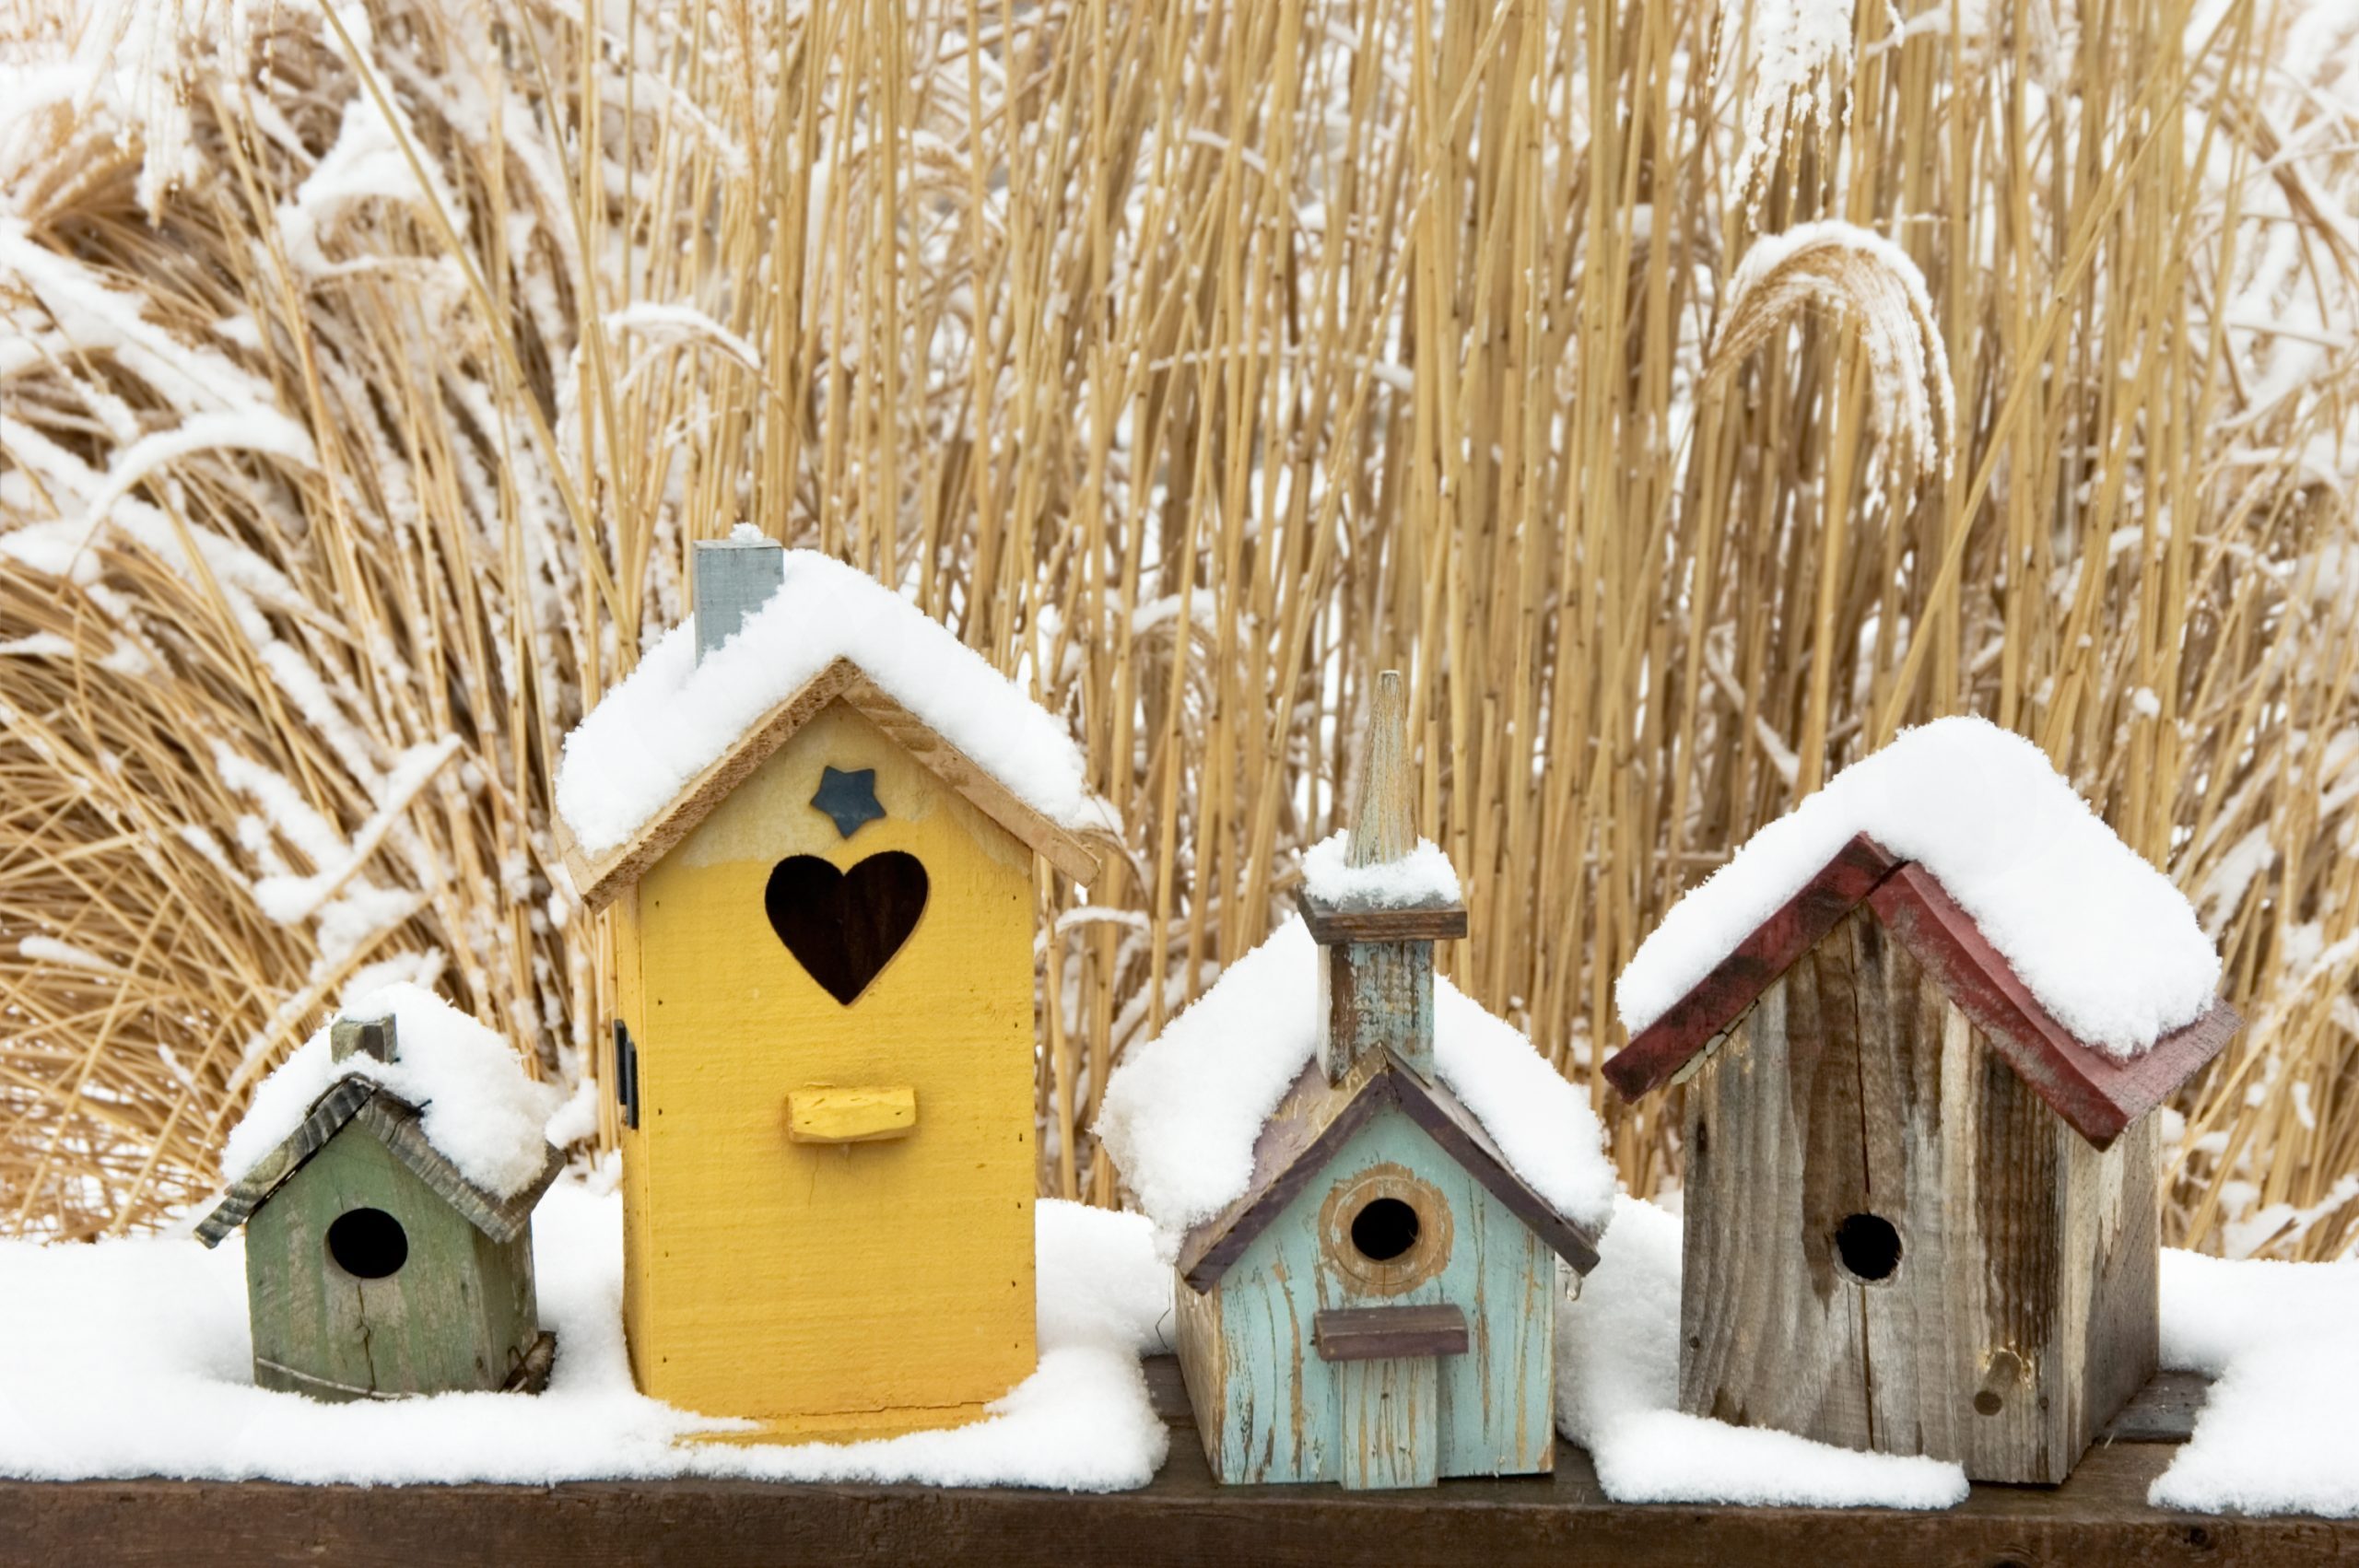 When Should I Clean Out Bird Houses?